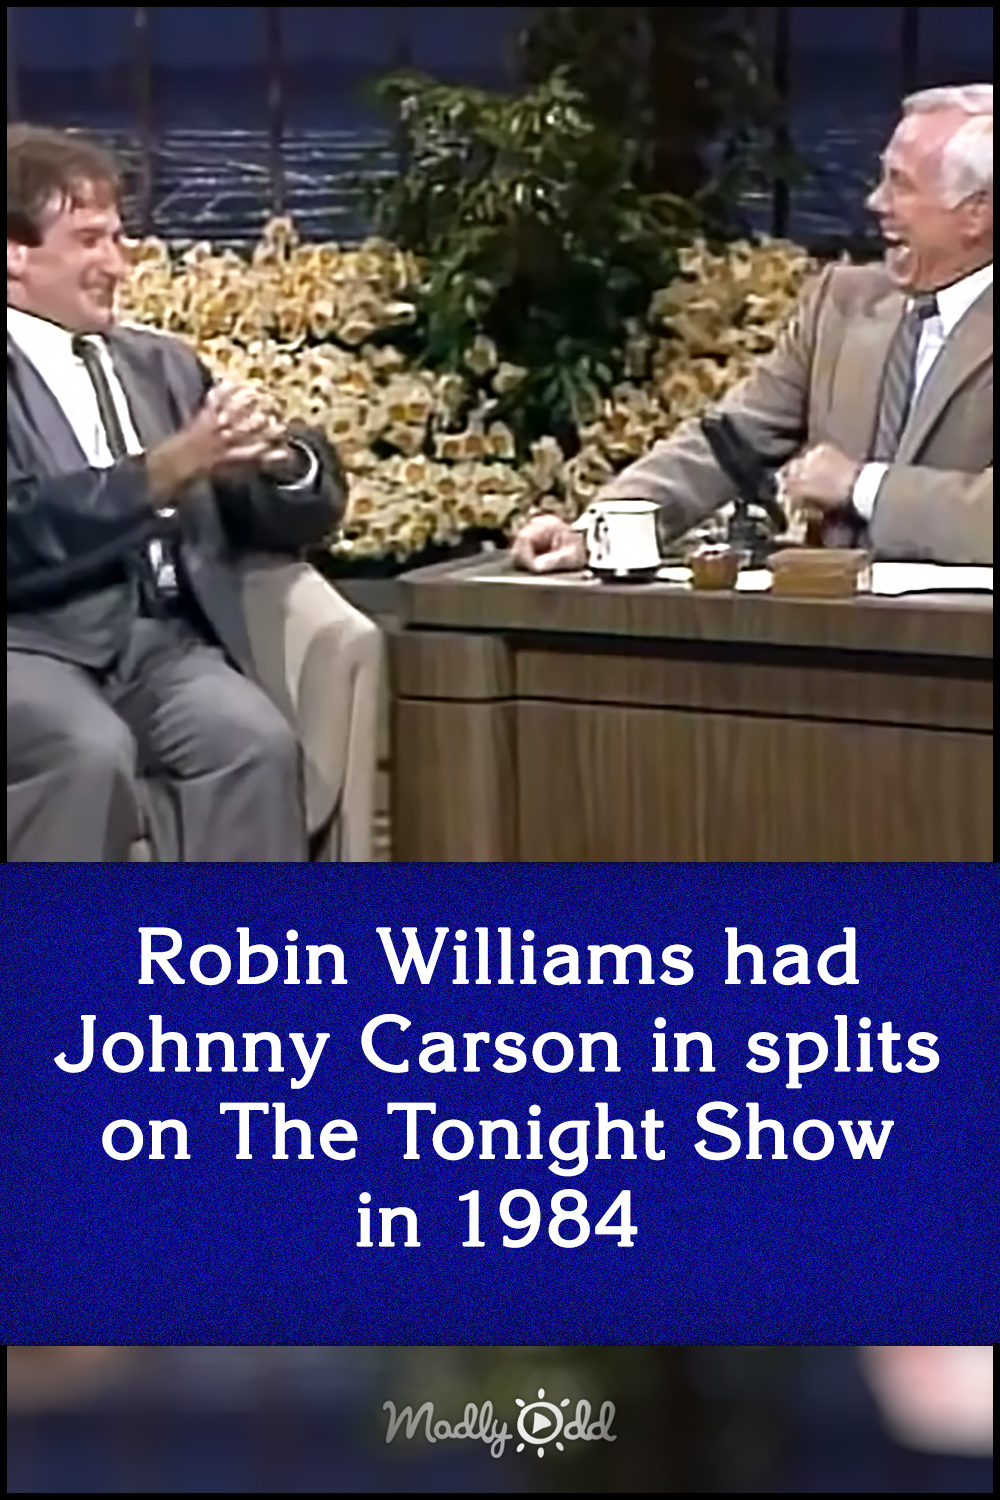 Robin Williams had Johnny Carson in splits on The Tonight Show in 1984